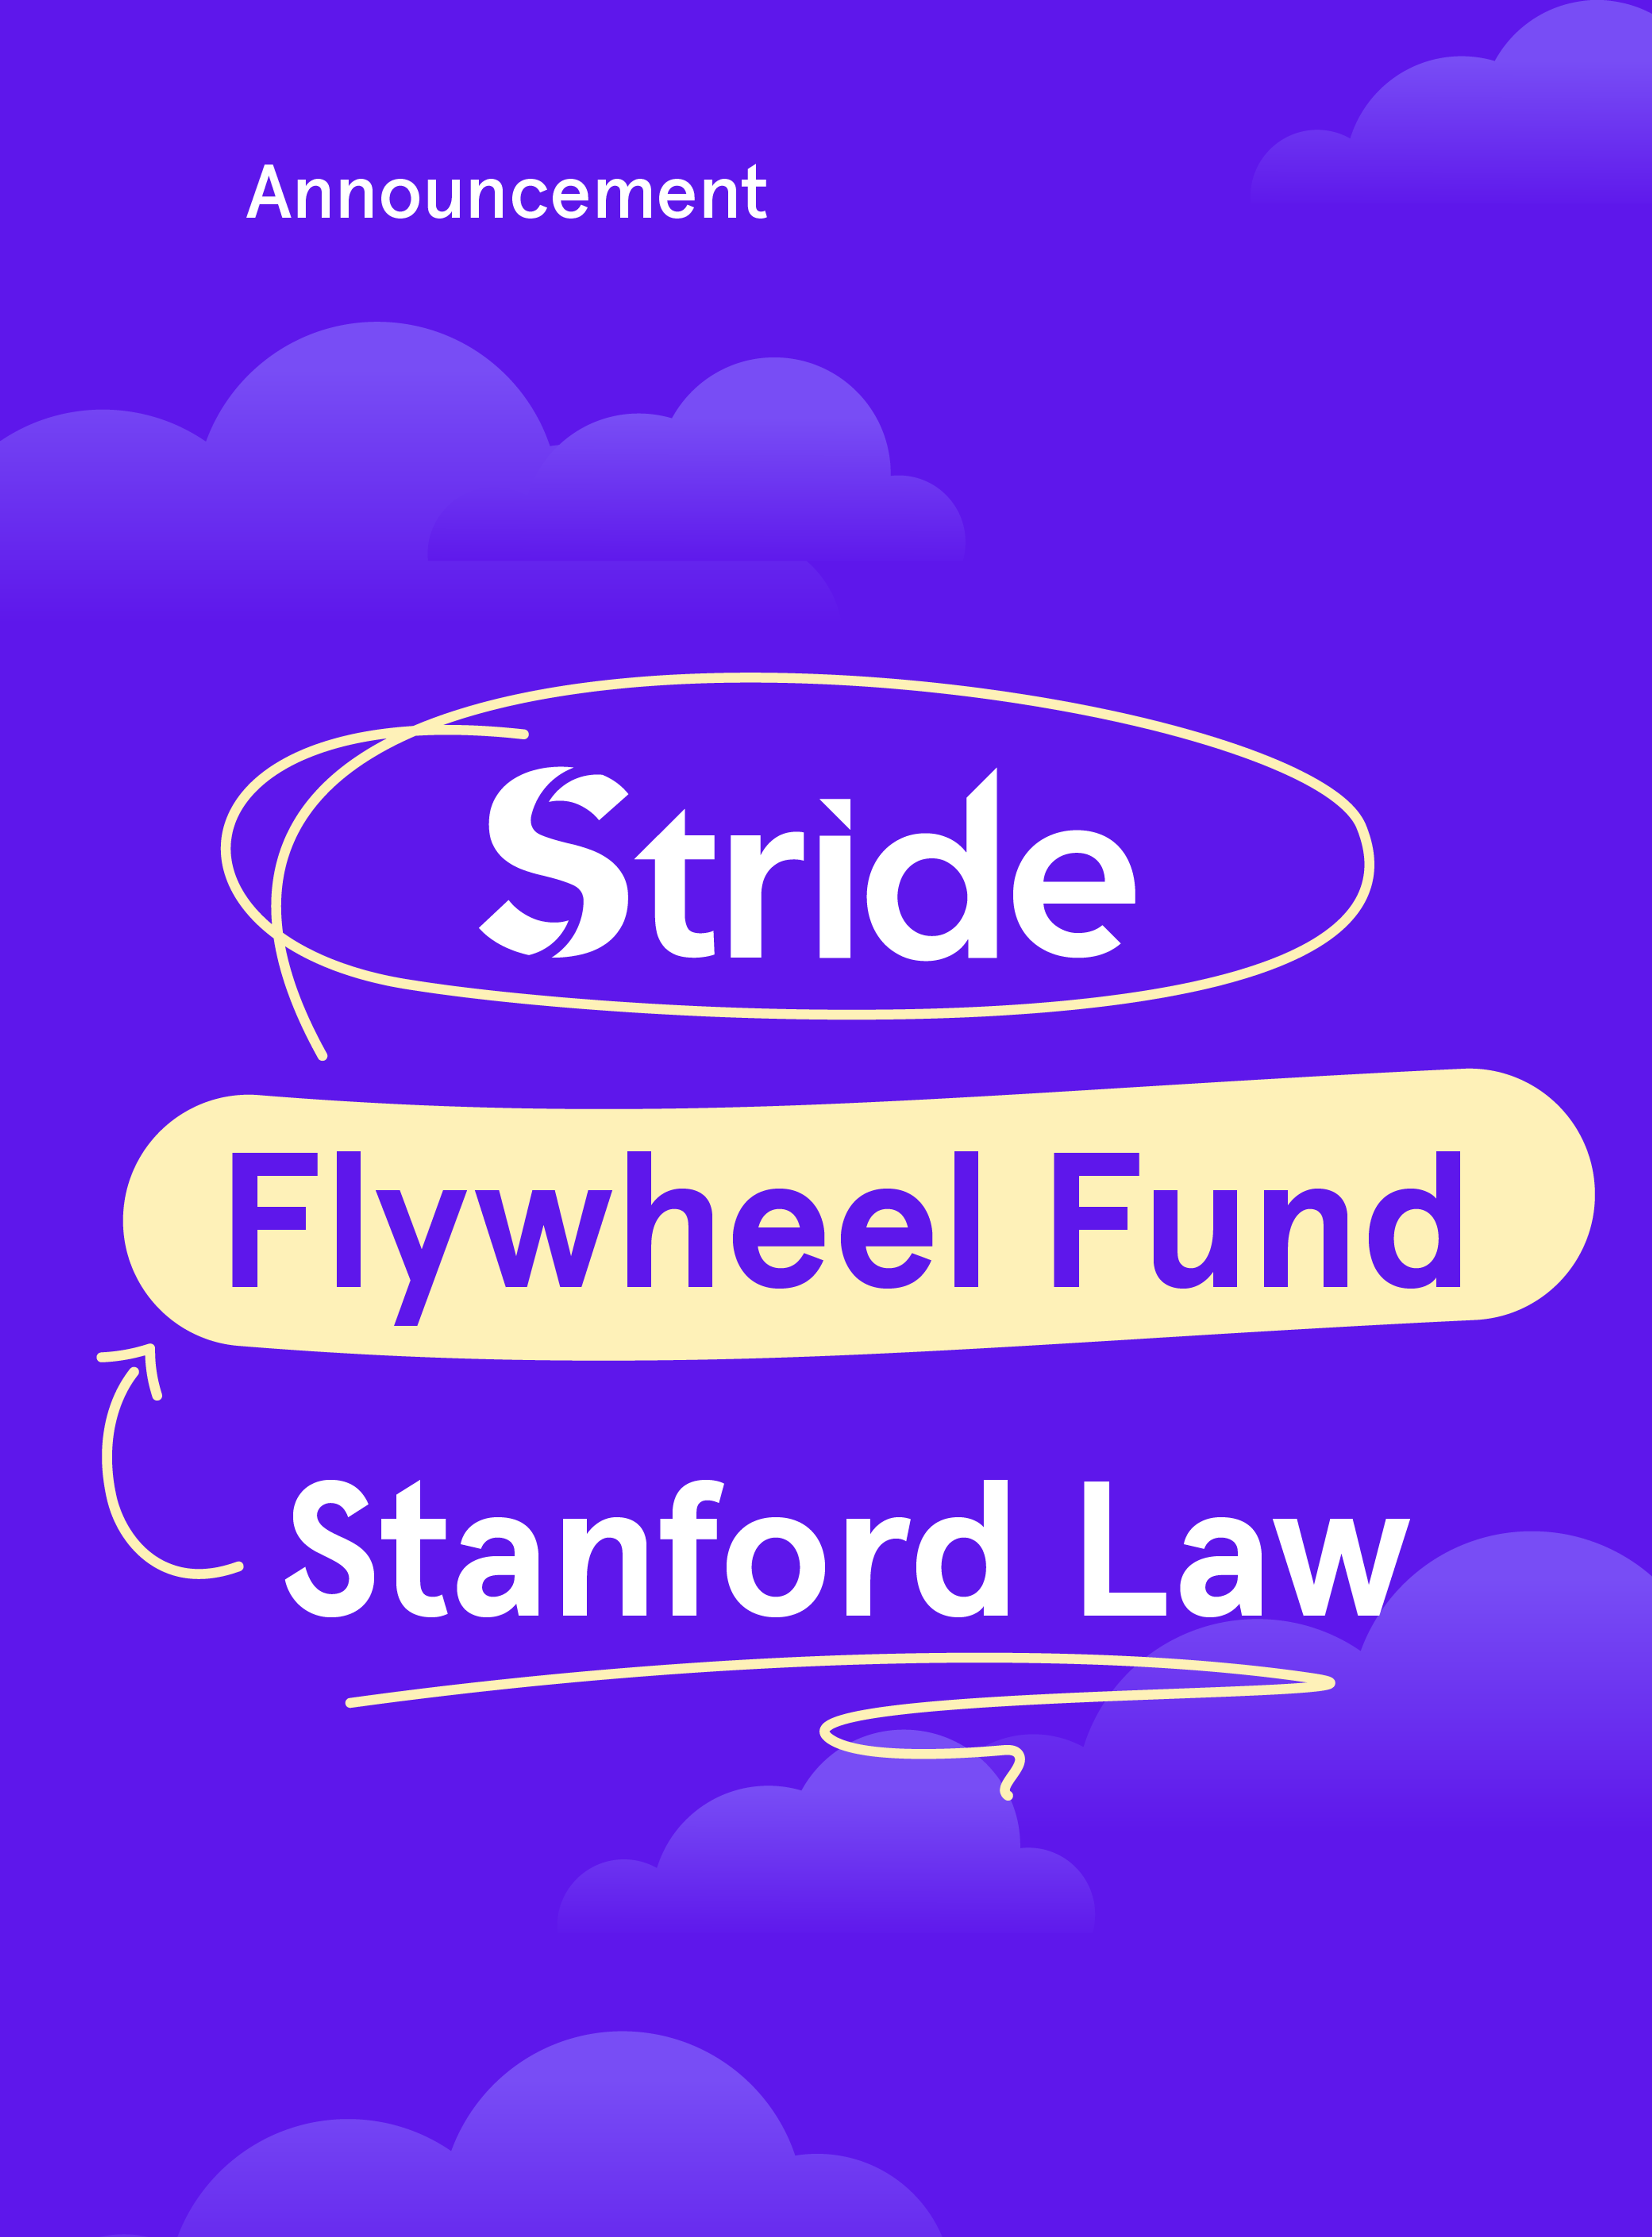 The Flywheel Fund for Career Choice, Powered by Stride Funding, At Stanford Law School